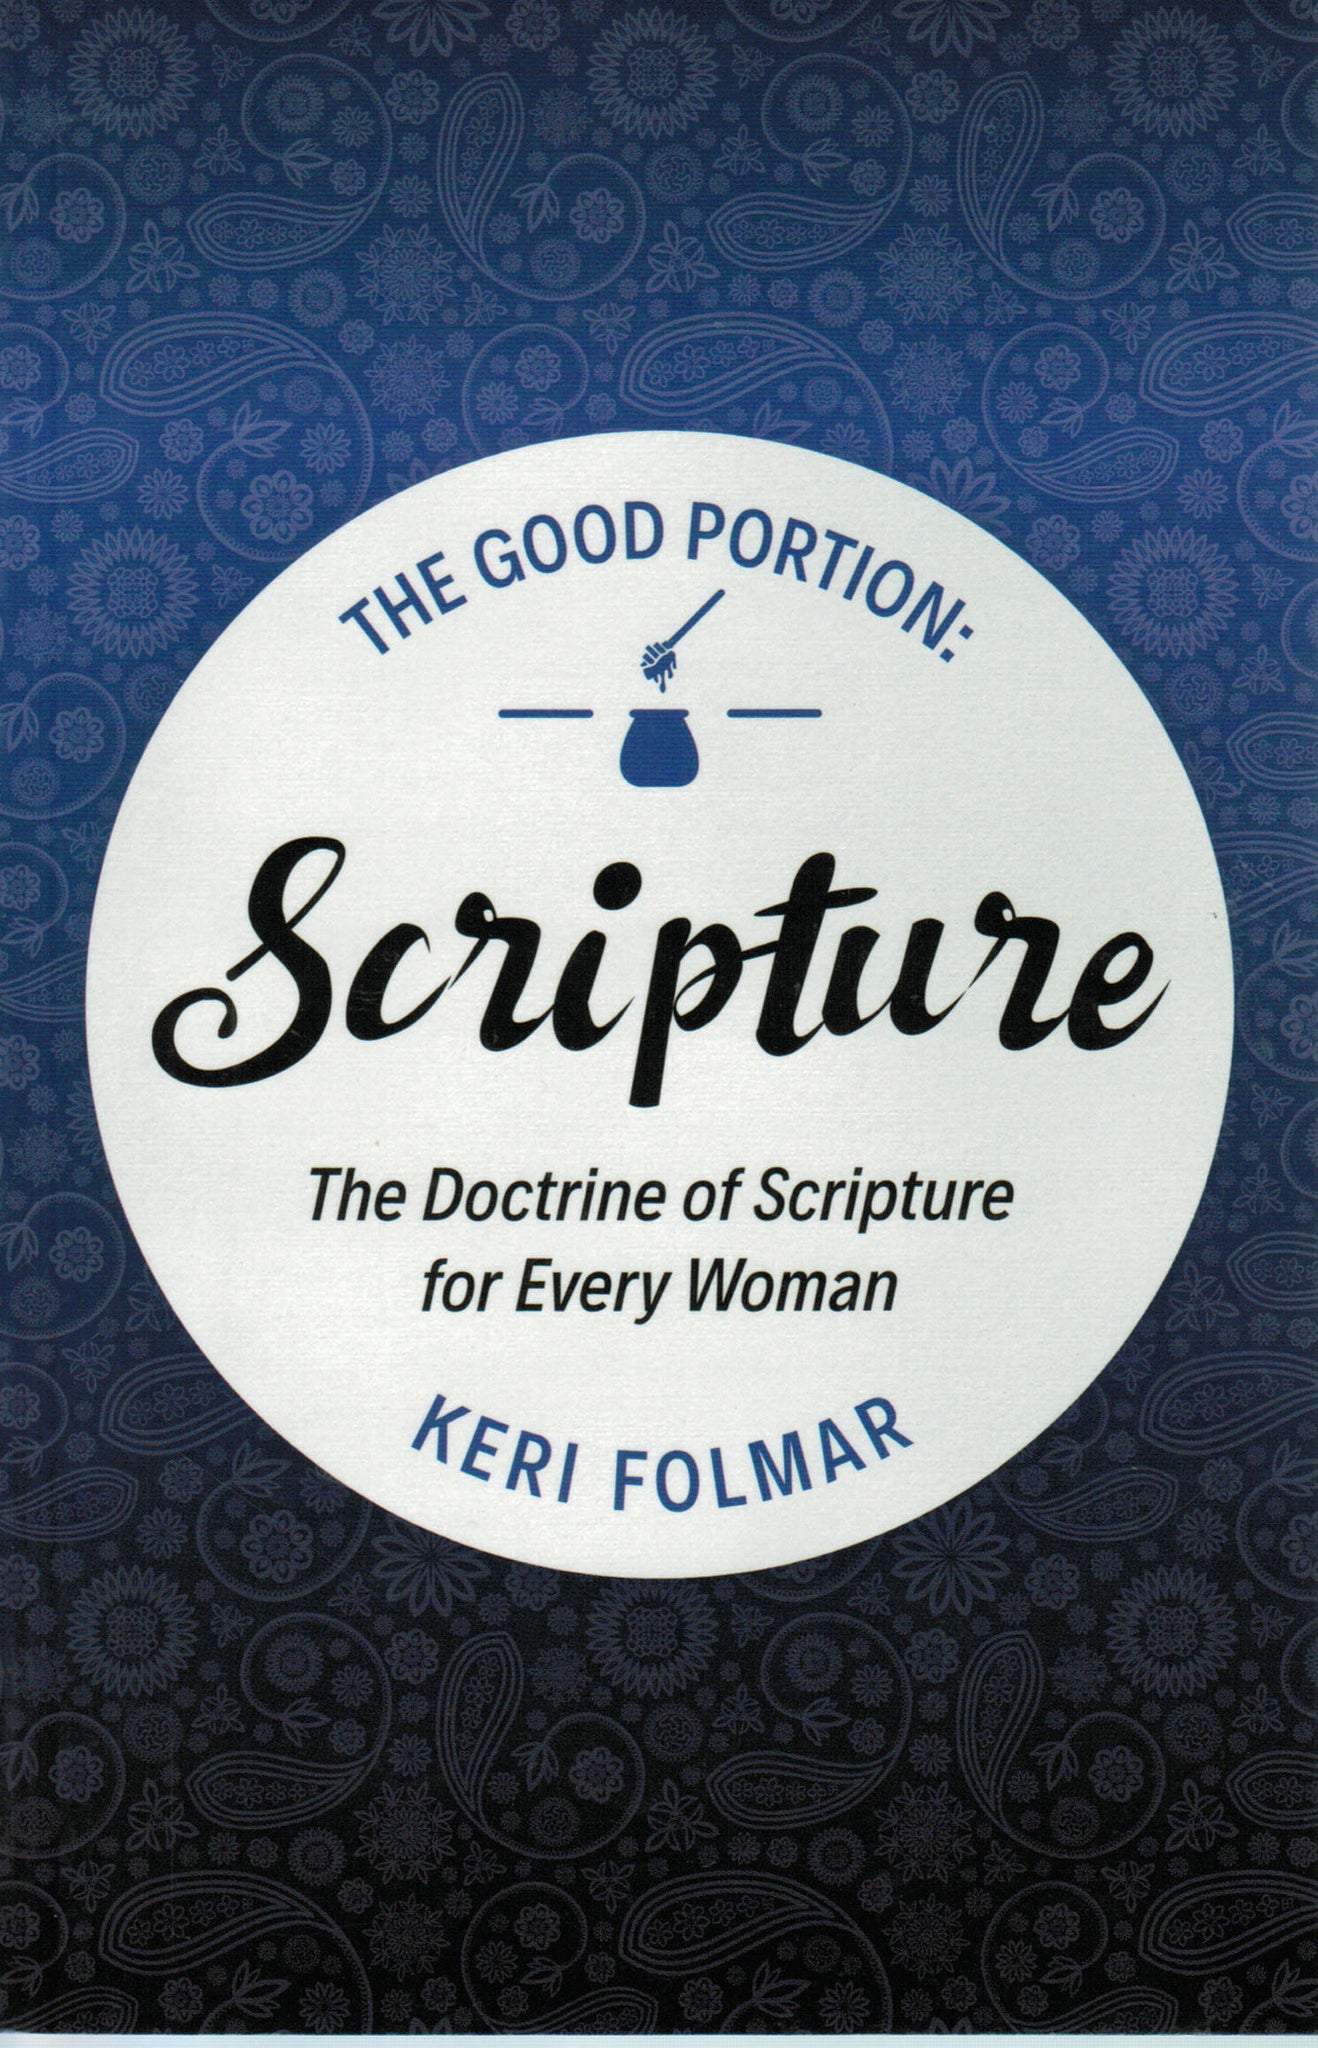 The Good Portion - Scripture: The Doctrine of Scripture for Every Woman